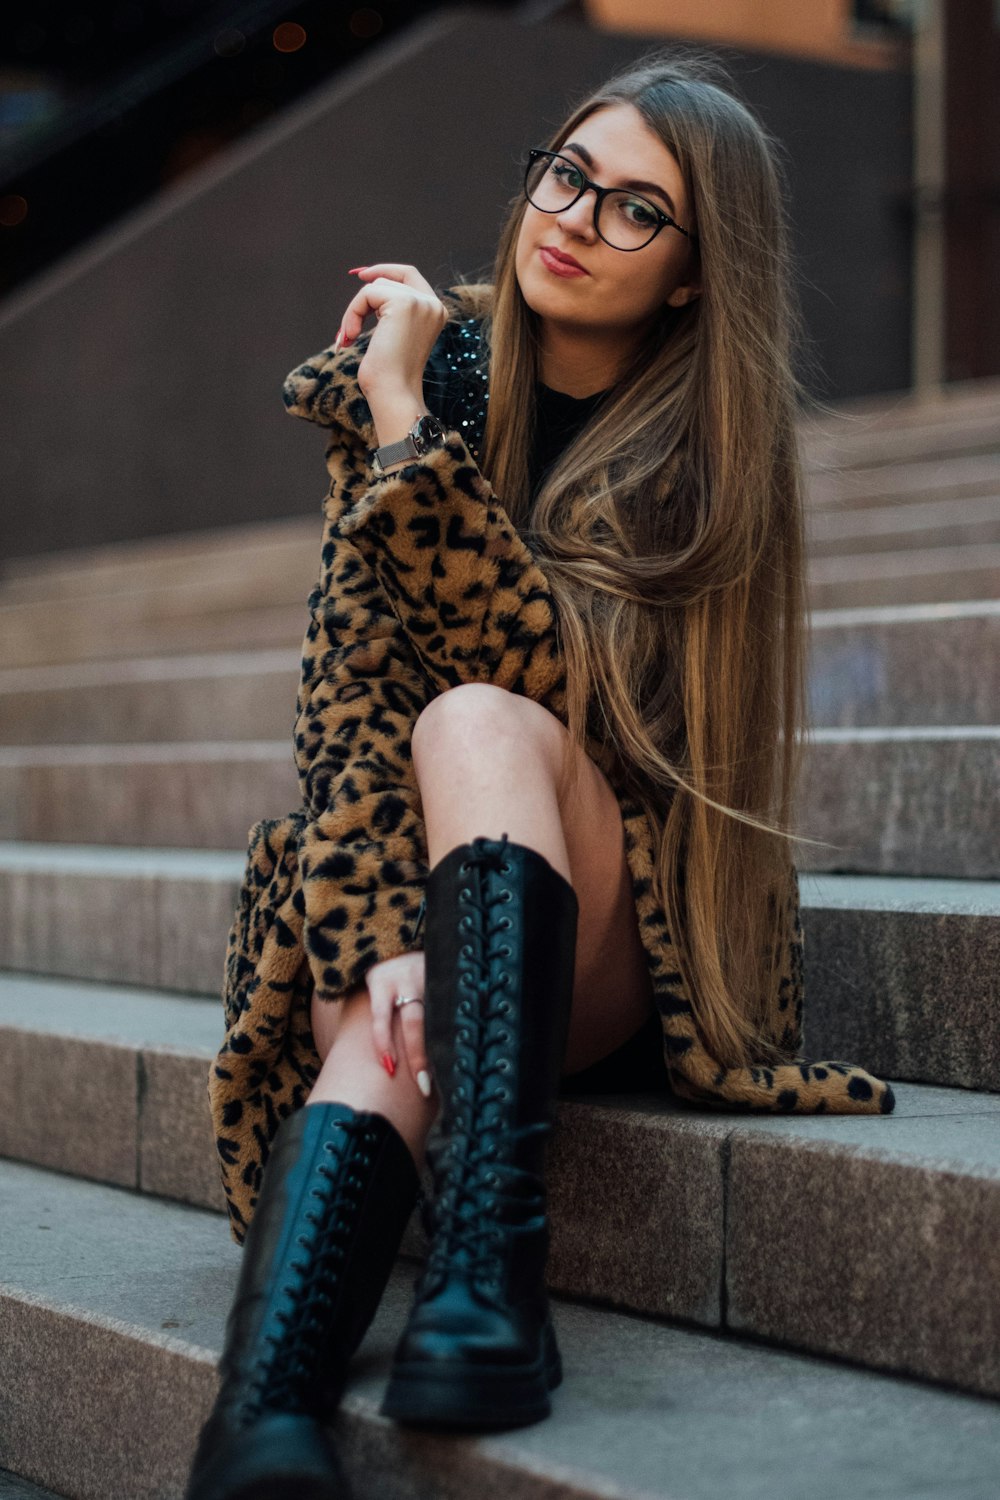 woman in leopard print coat and black boots sitting on concrete stairs